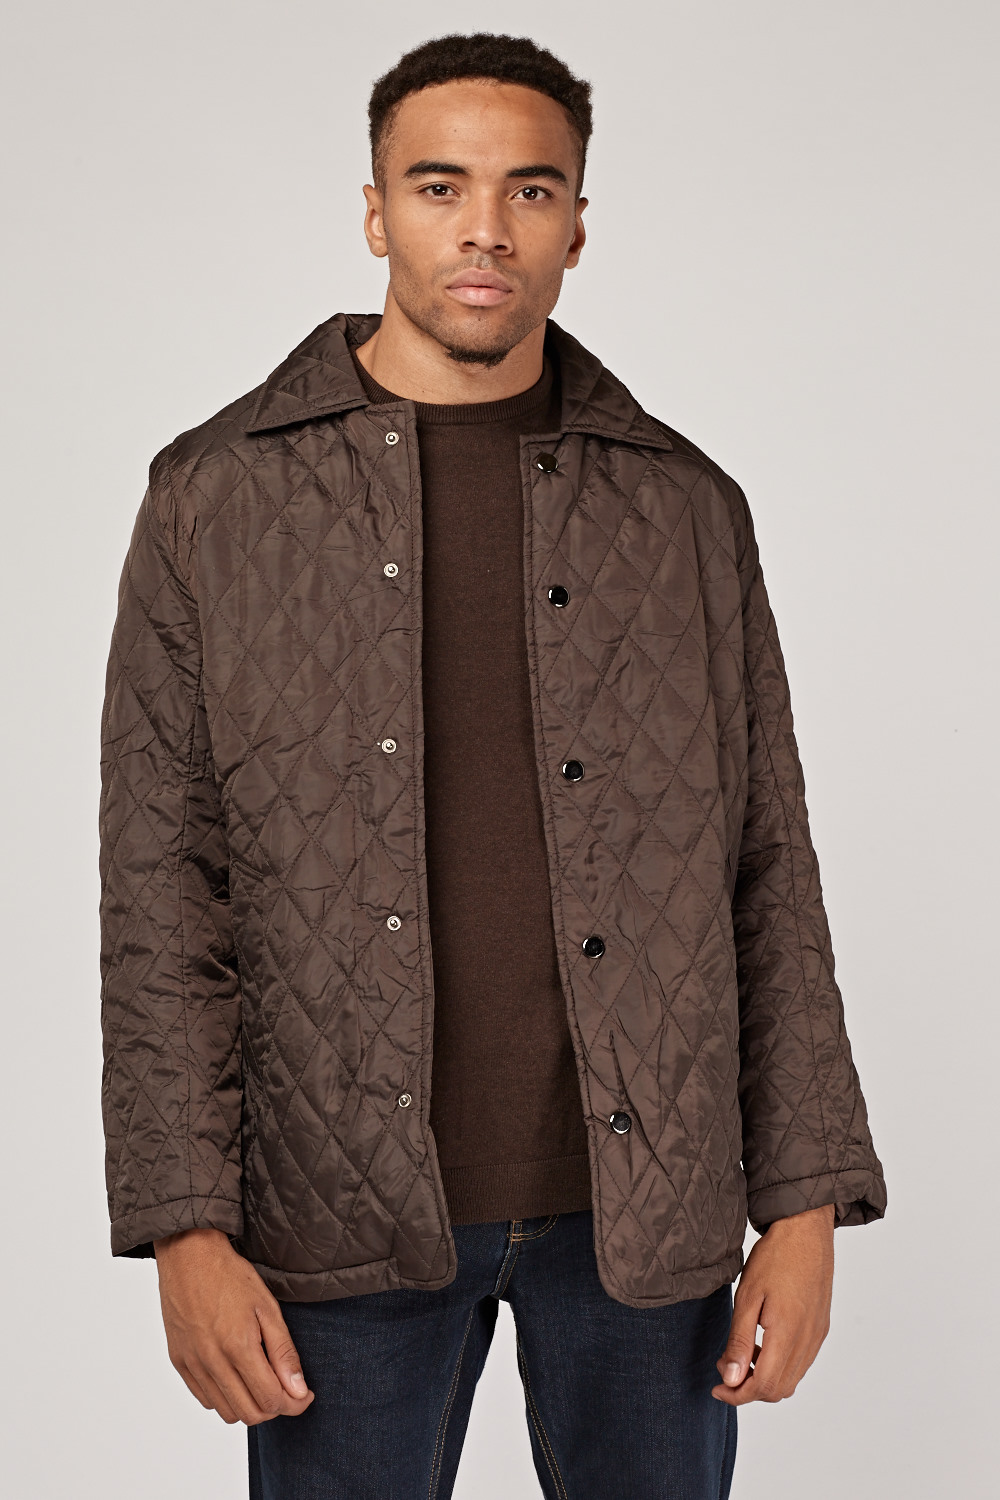 Download Diamond Quilted Detachable Sleeve Jacket - Just $7